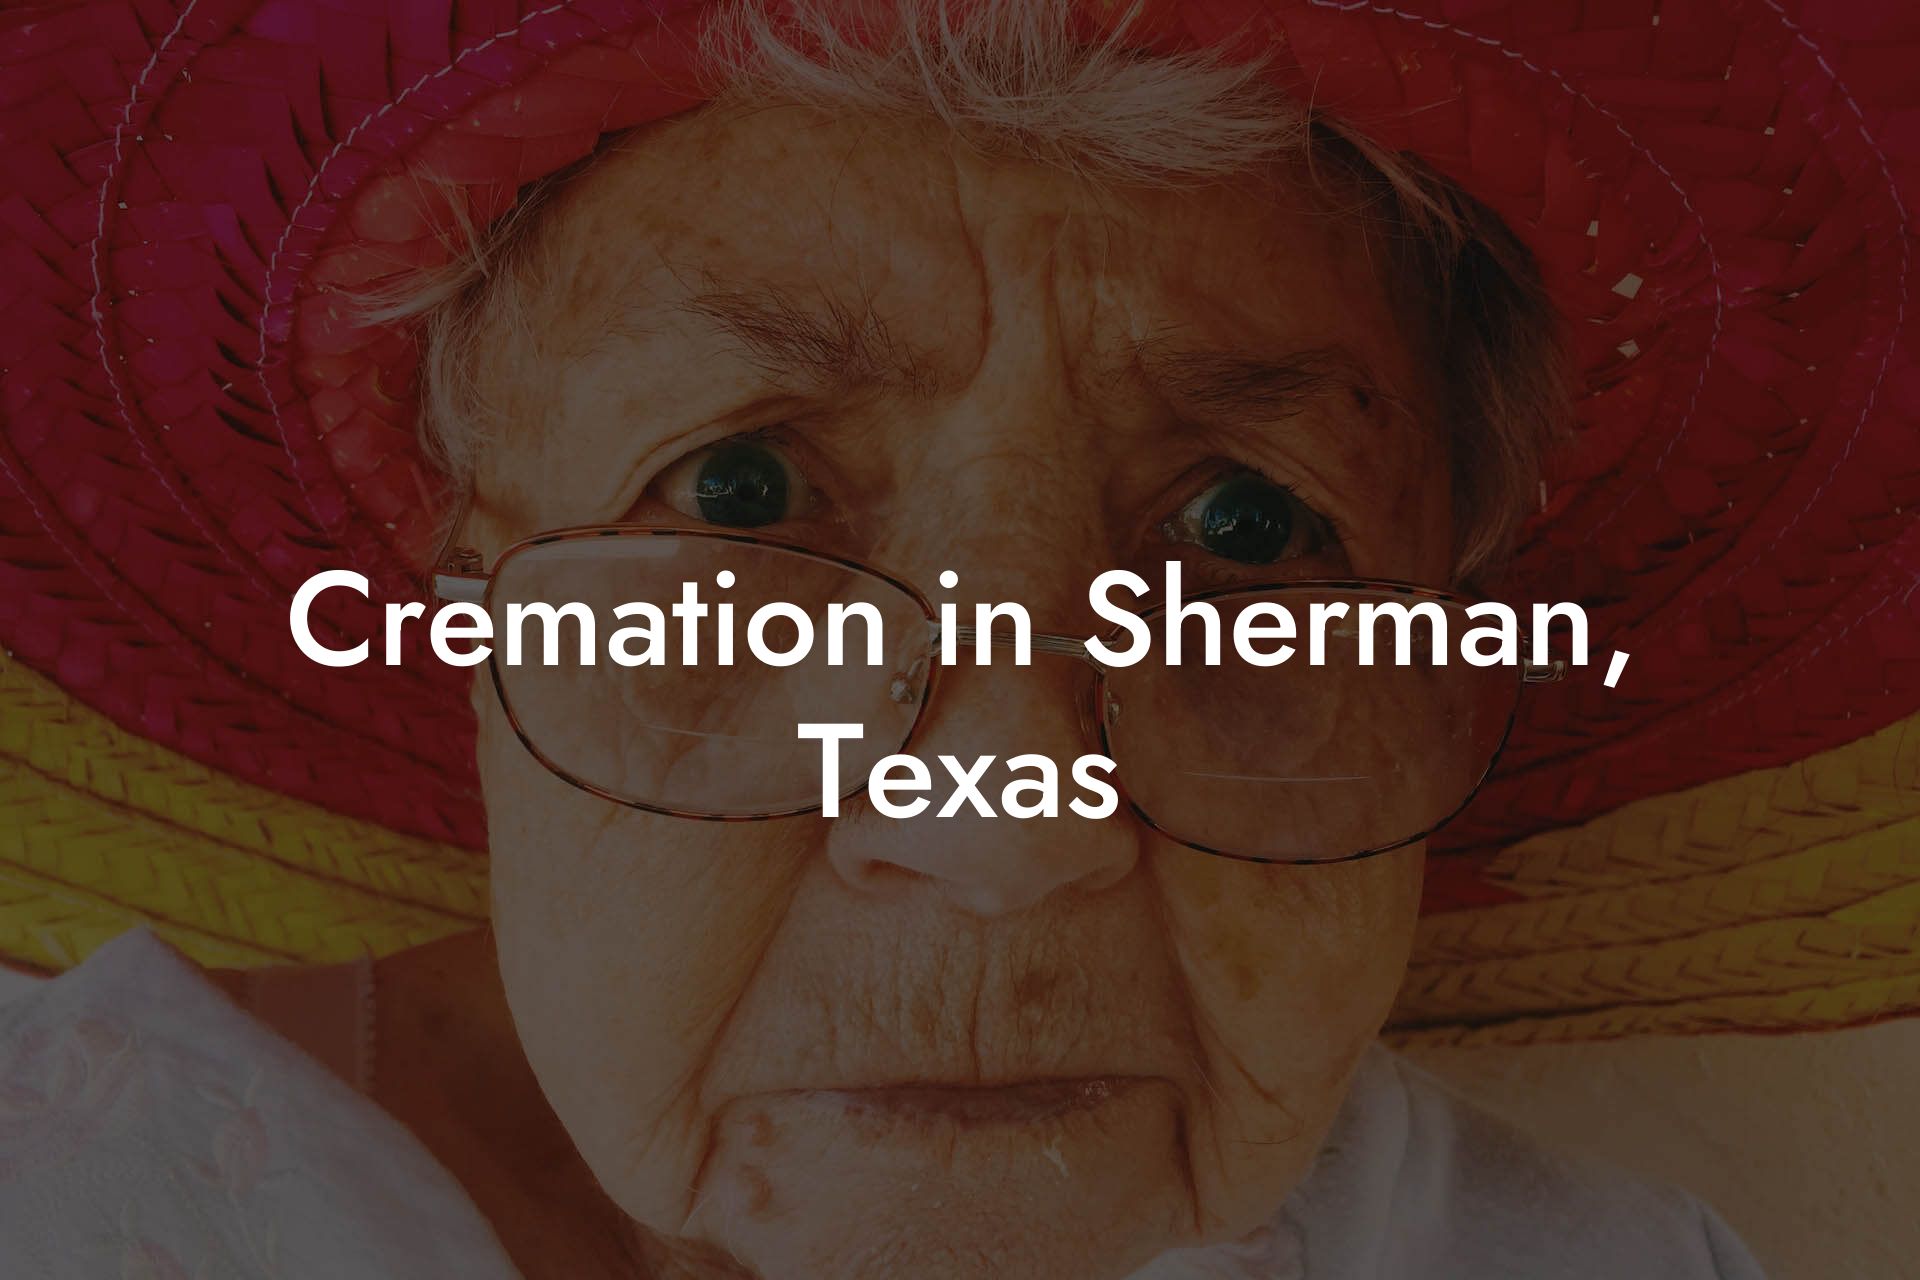 Cremation in Sherman, Texas